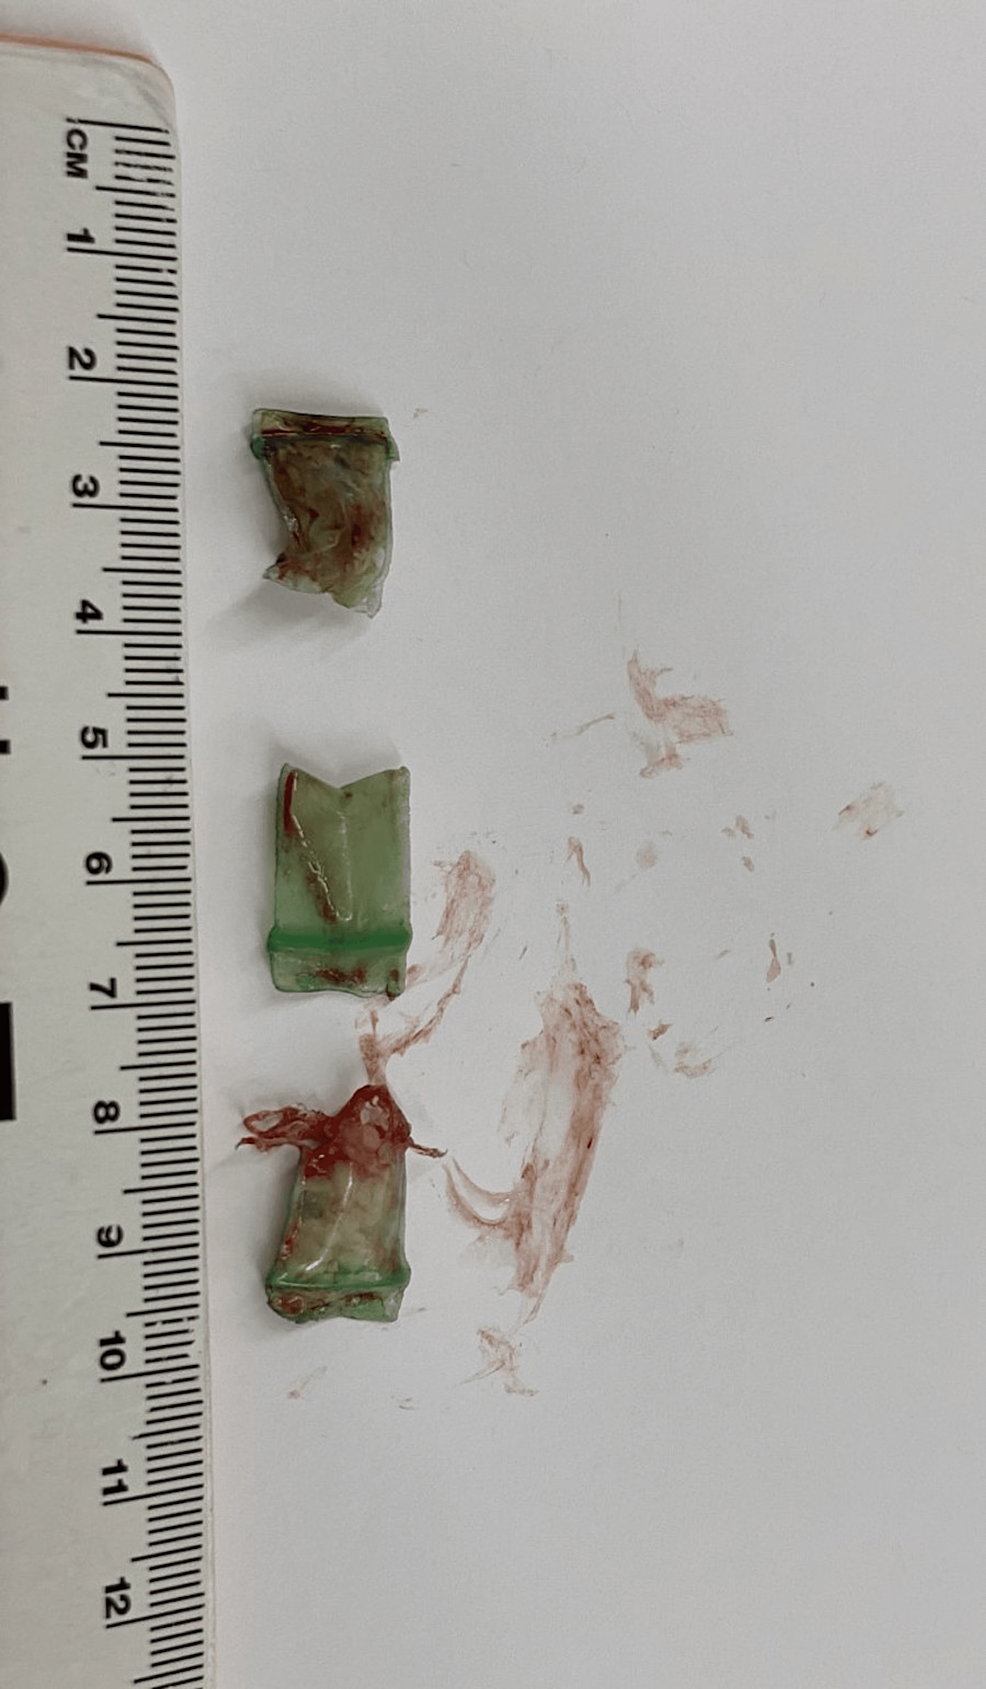 Three-plastic-bags,-about-1-x-0.5-cm-in-size,-containing-an-unknown-substance,-were-extracted-by-alligator-forceps-from-the-left-mainstem-bronchus.